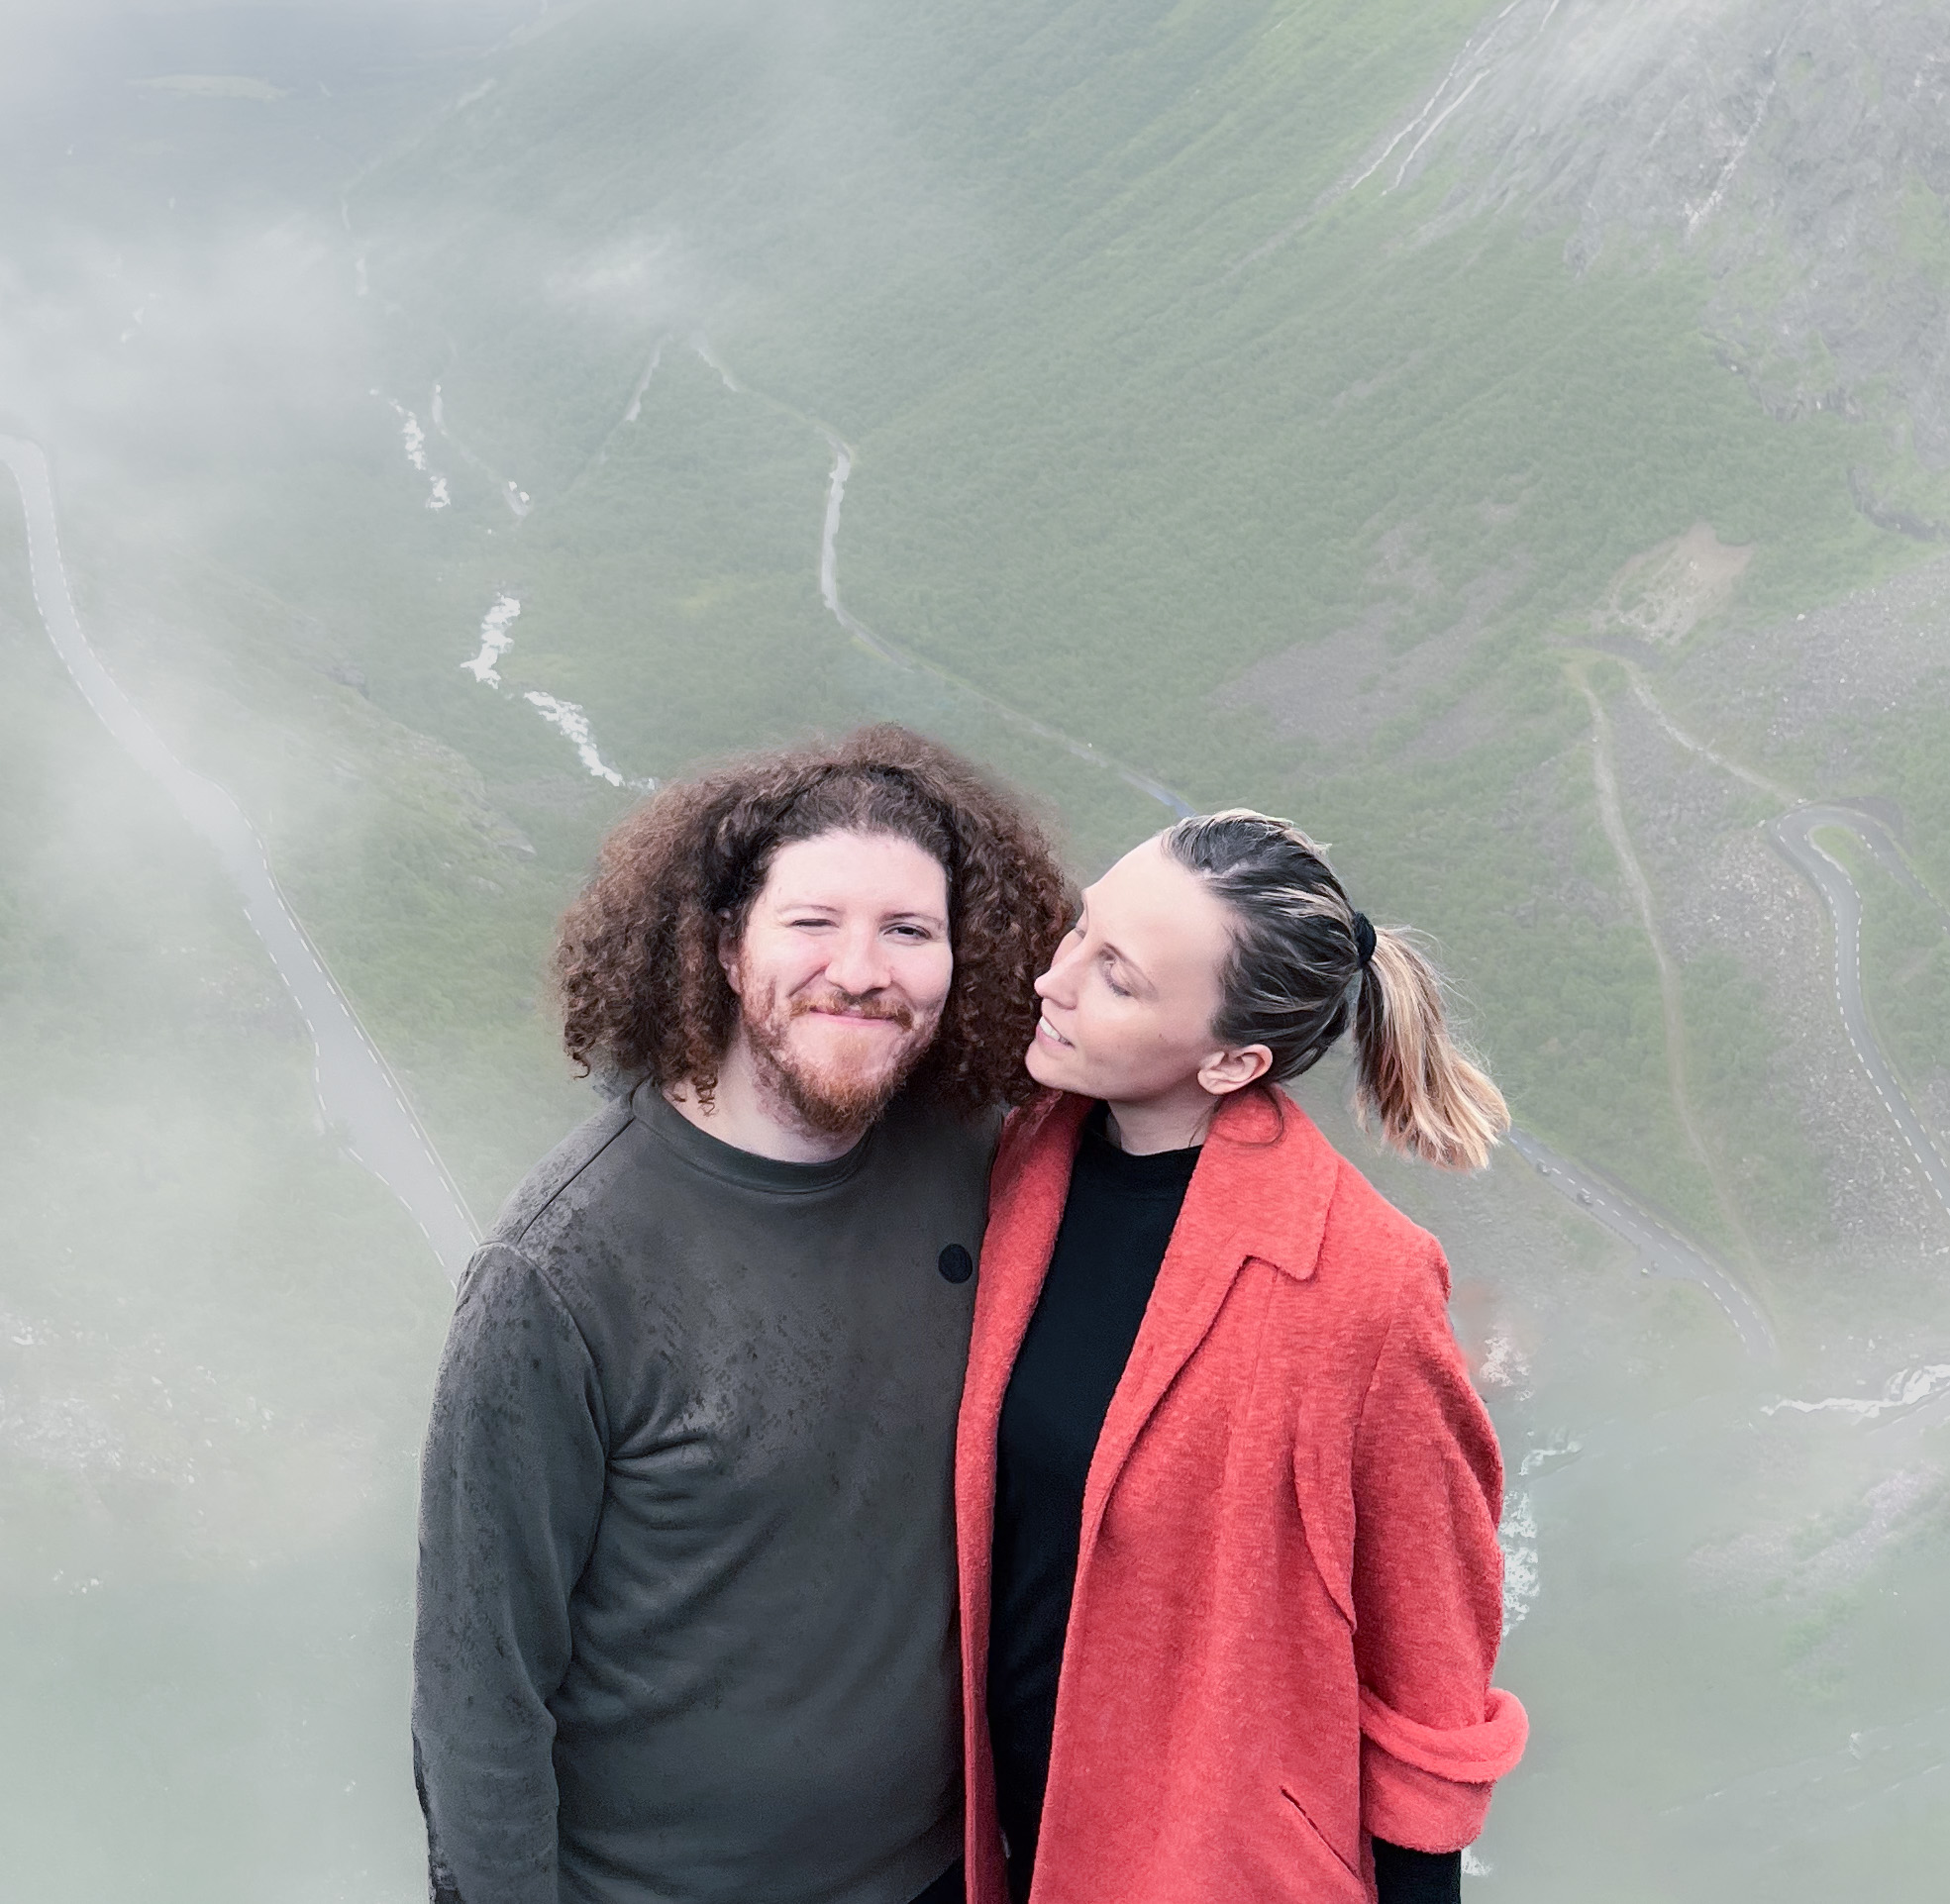 Two people, misty background.